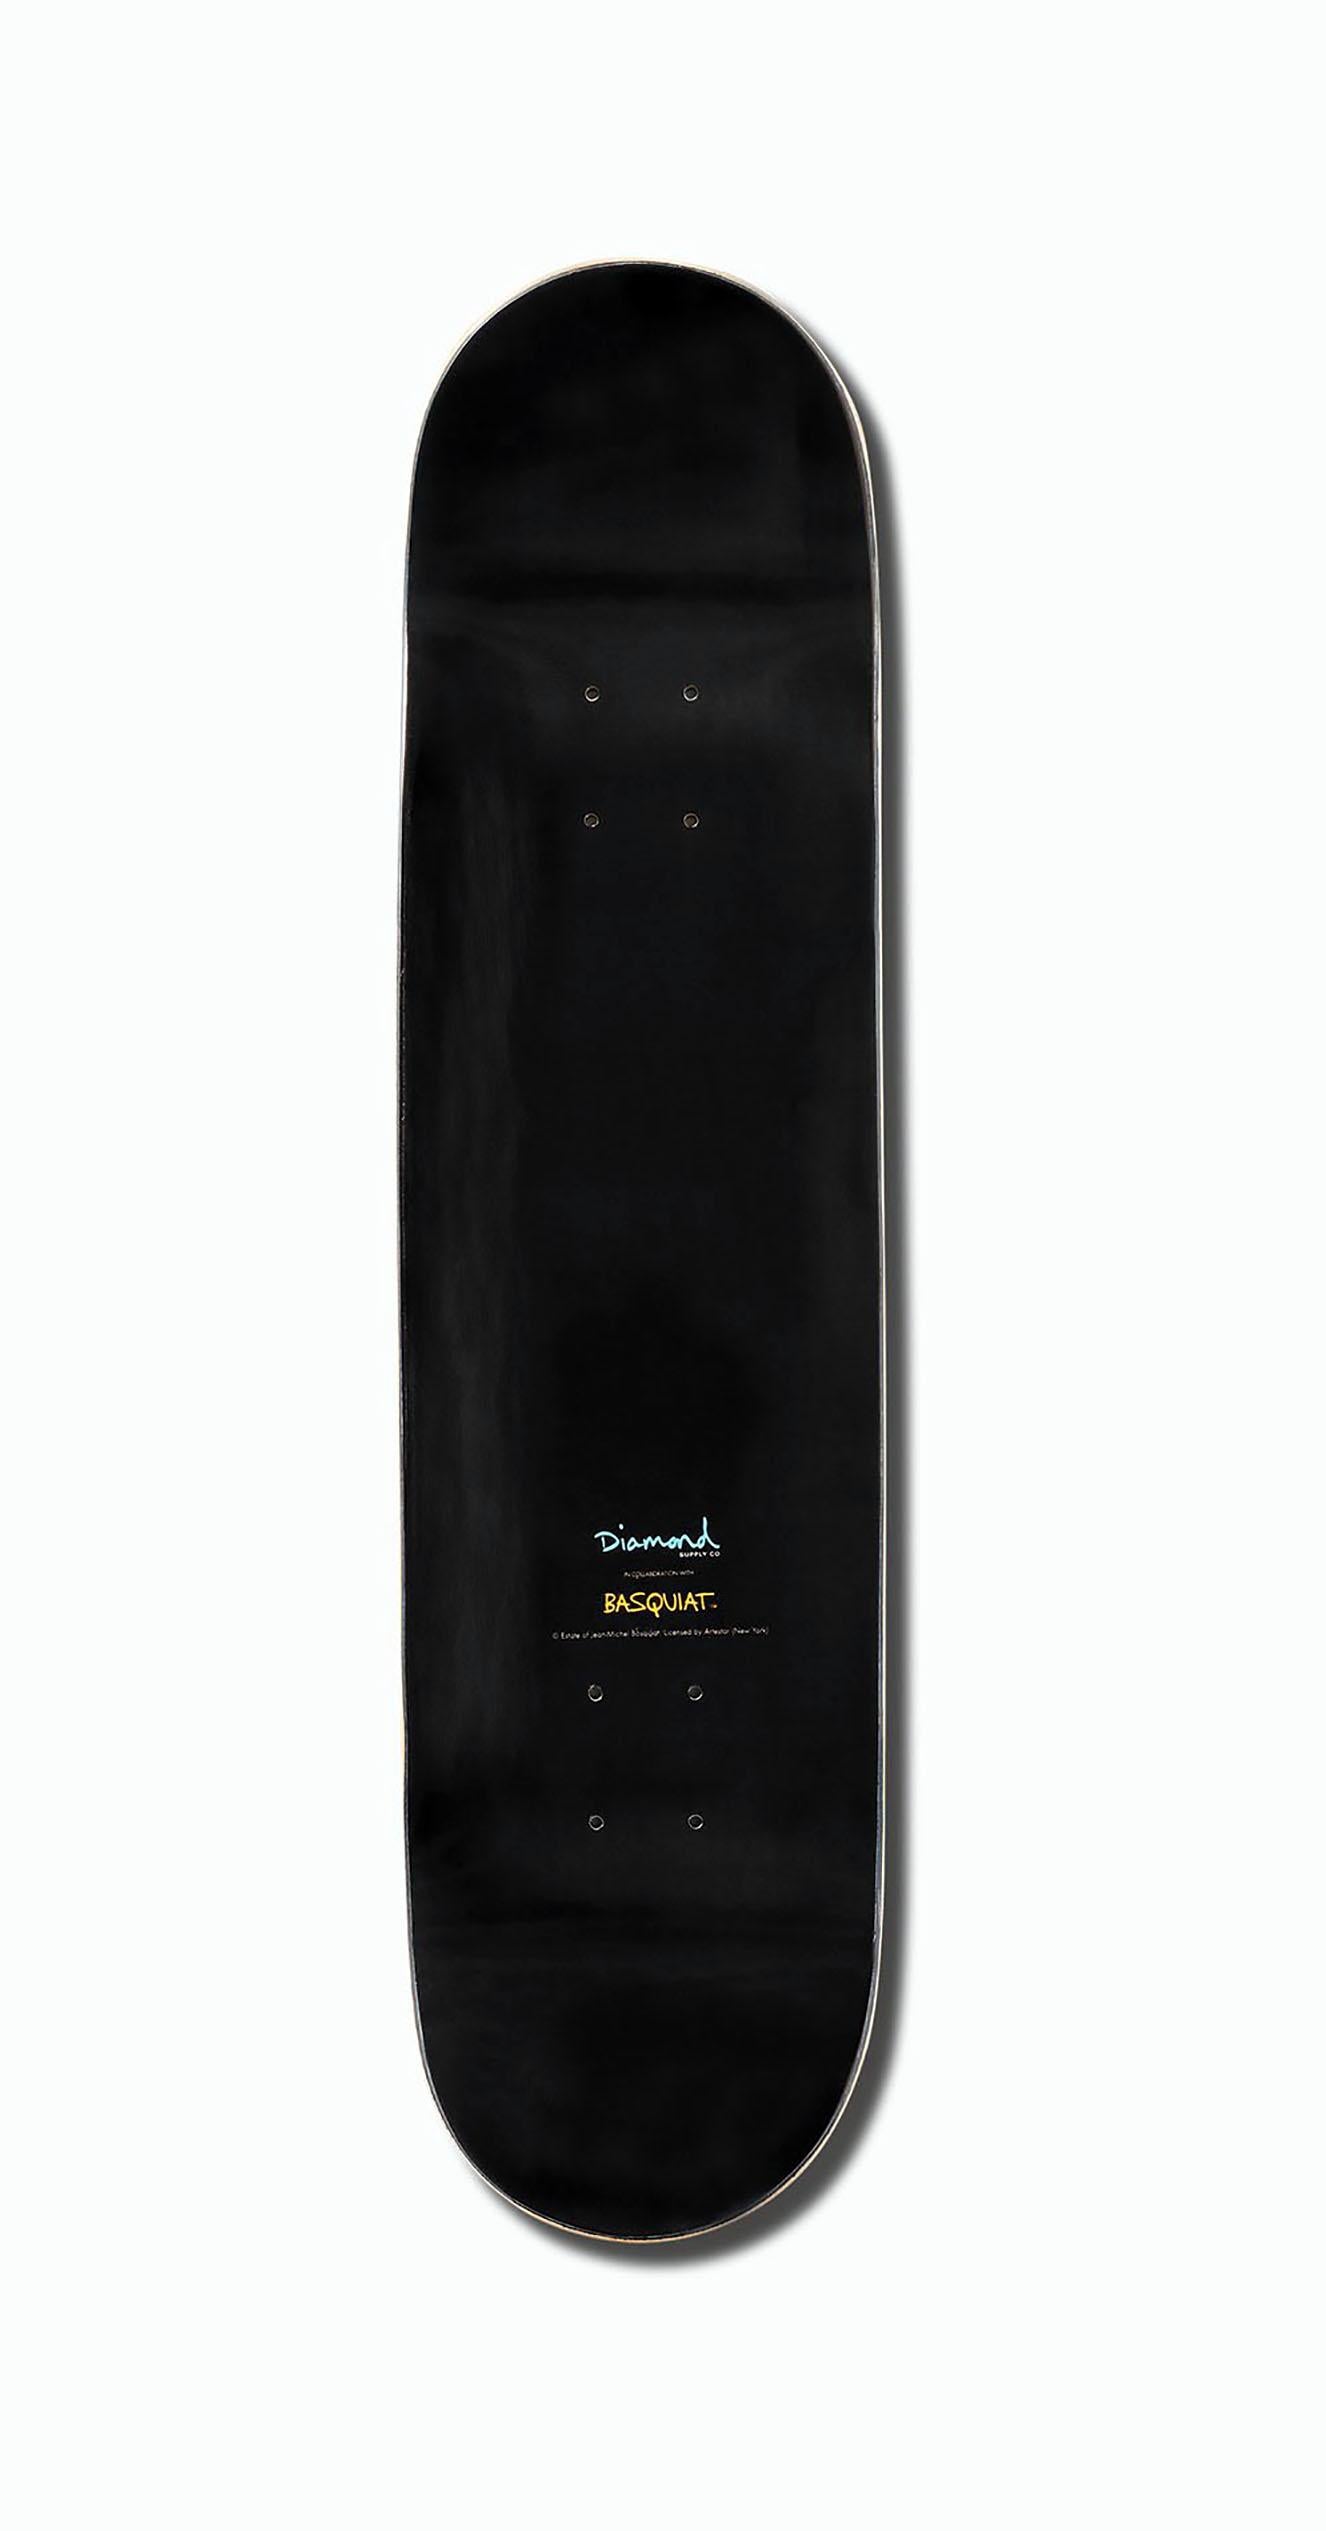 Jean-Michel Basquiat Skateboard Deck: 
Limited edition Basquiat skateboard deck licensed by the Estate of Jean-Michel Basquiat in conjunction with Artestar in 2018, featuring offset imagery of Basquiat's Porter drawing (1984). Makes for unique,